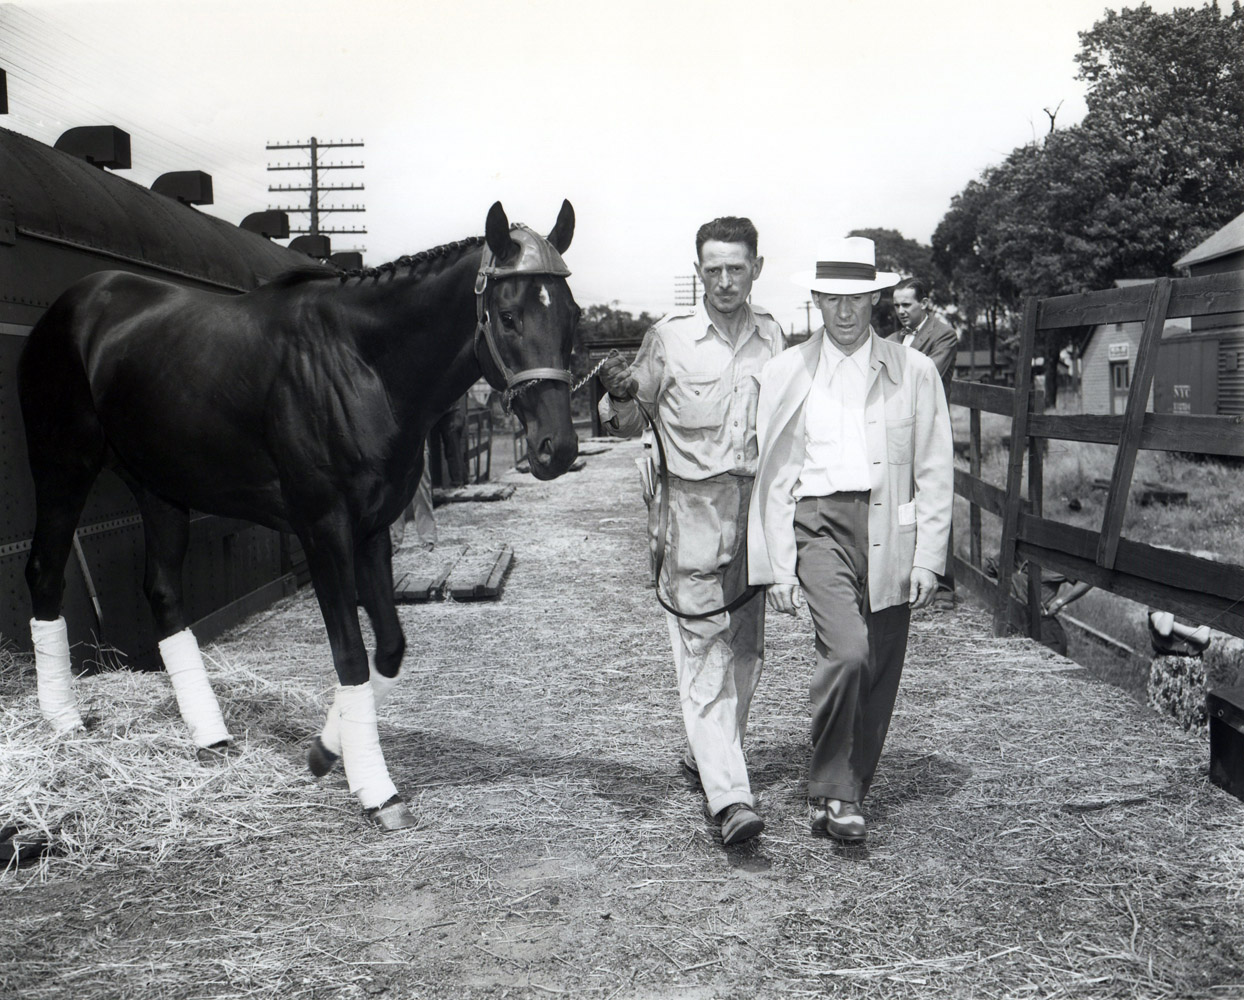 Noor arriving in Saratoga in 1950 with trainer Burley Parke (Keeneland Library Morgan Collection/Museum Collection)